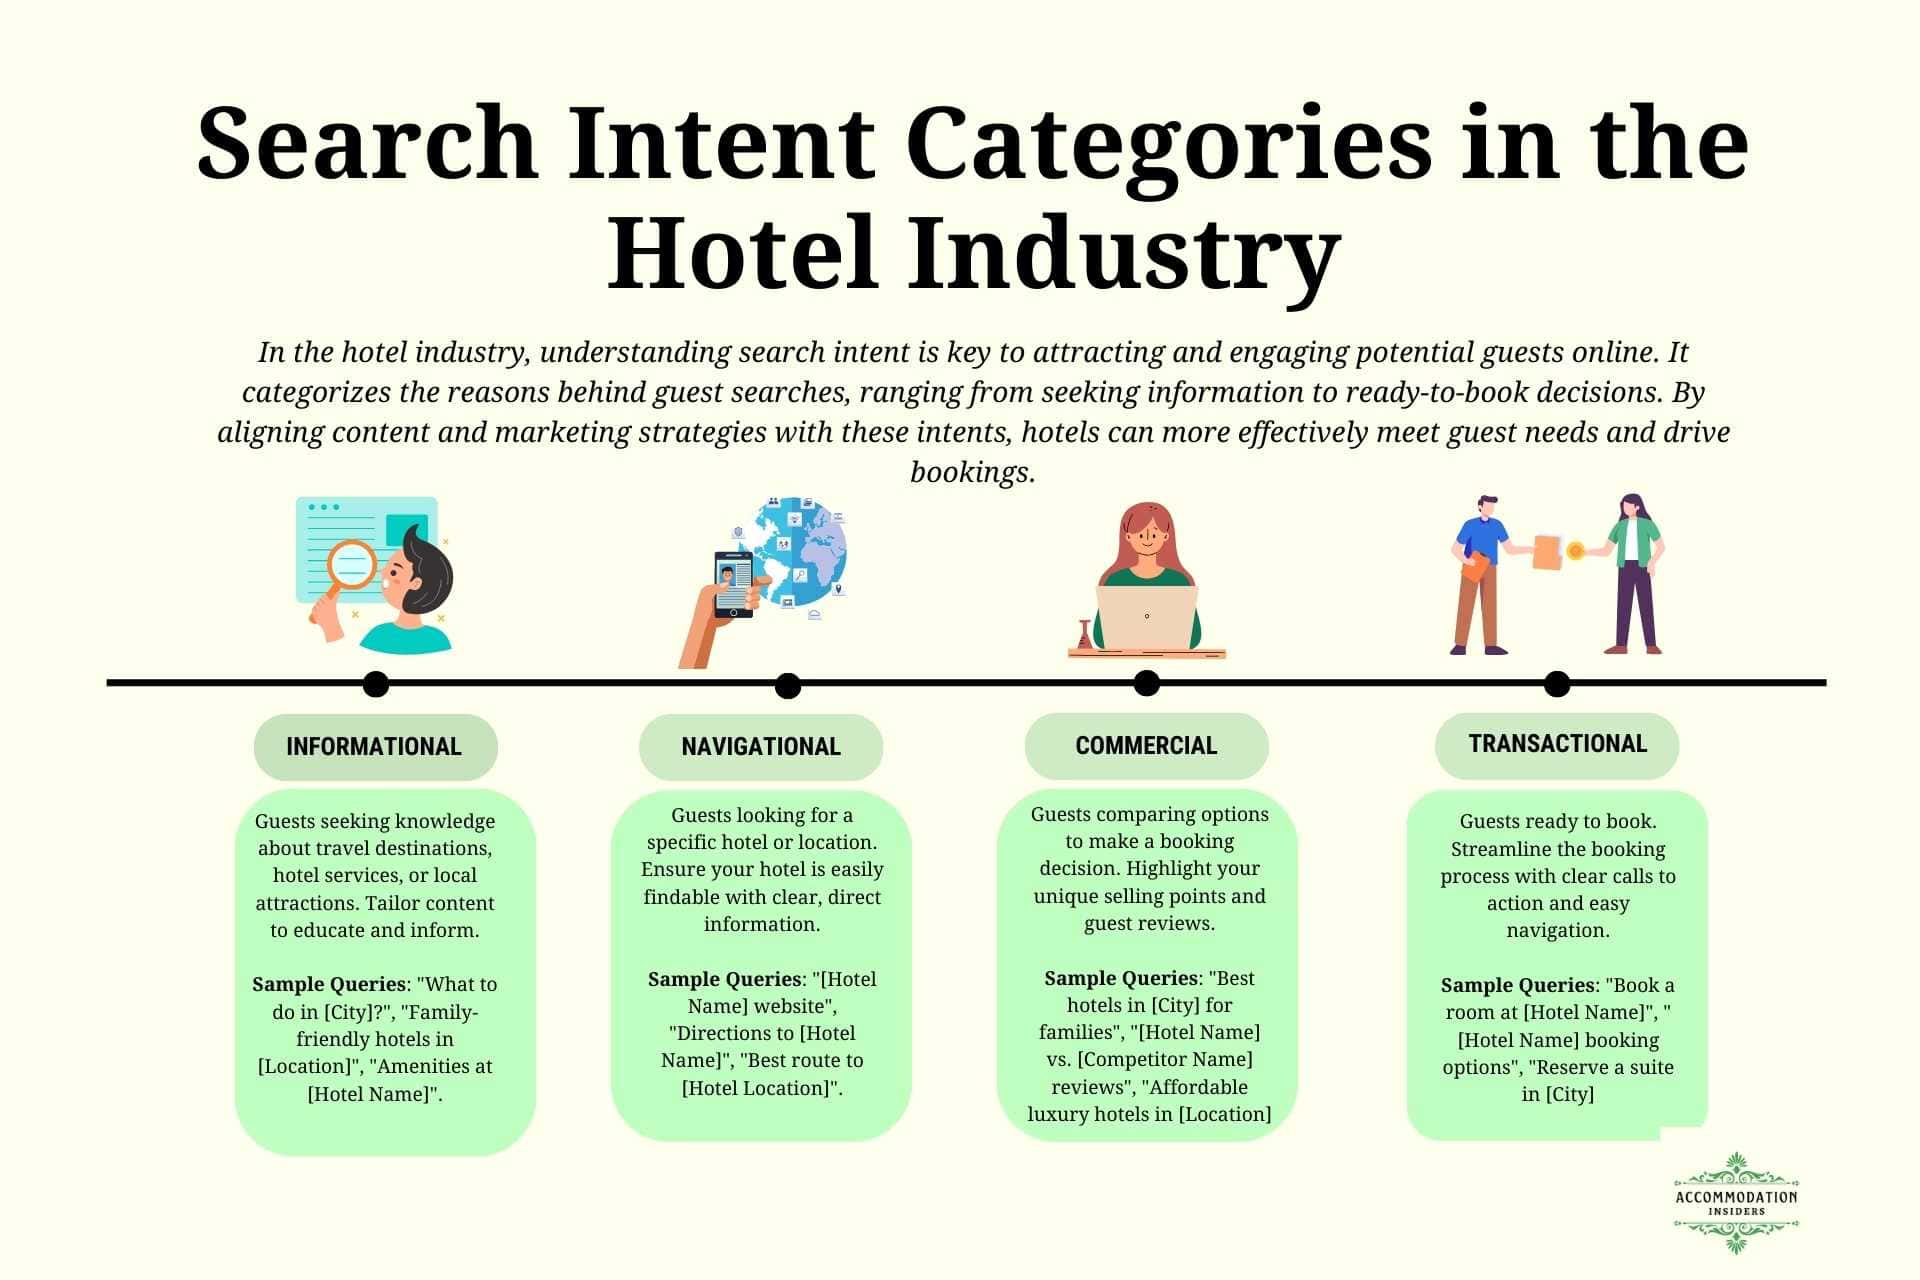 Infographic titled 'Search Intent Categories in the Hotel Industry' details four types of guest intent: informational, navigational, commercial, and transactional, with corresponding illustrations. It emphasizes the importance of aligning marketing strategies with guest search intent to improve booking rates. The bottom of the image features the 'Accommodation Insiders' logo.